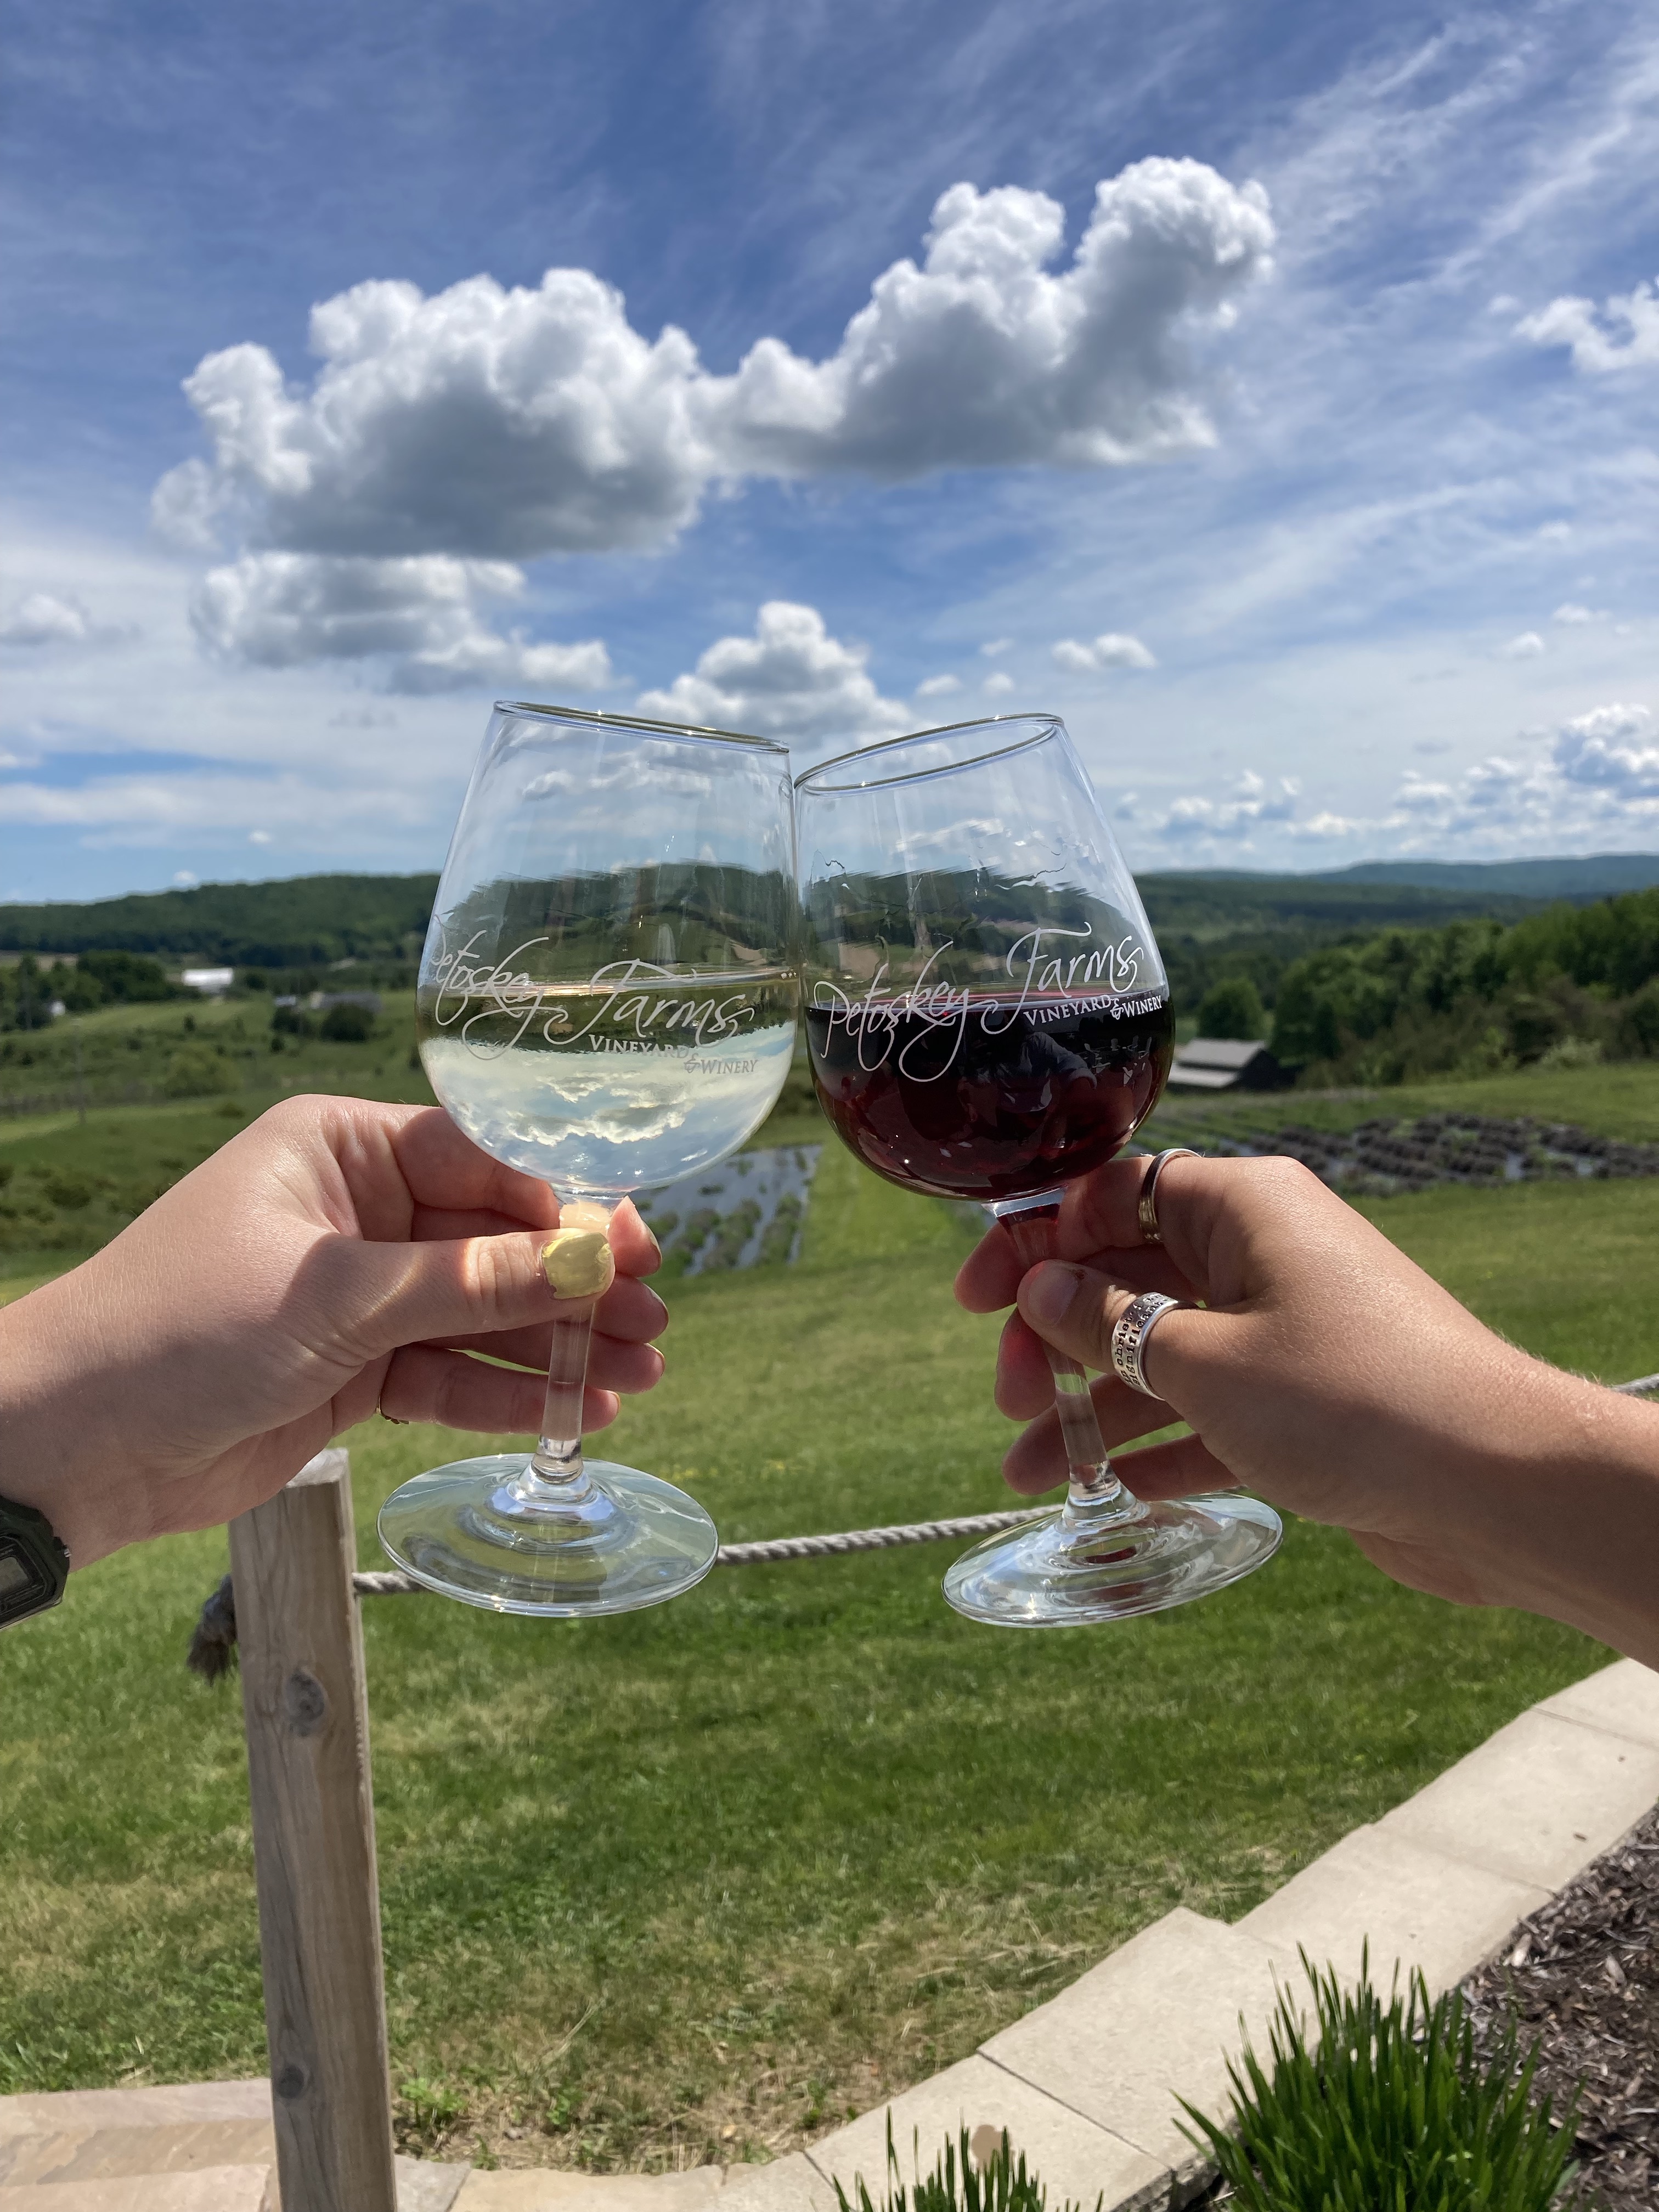 Two glasses of wine being held up in front of the scenic landscape.